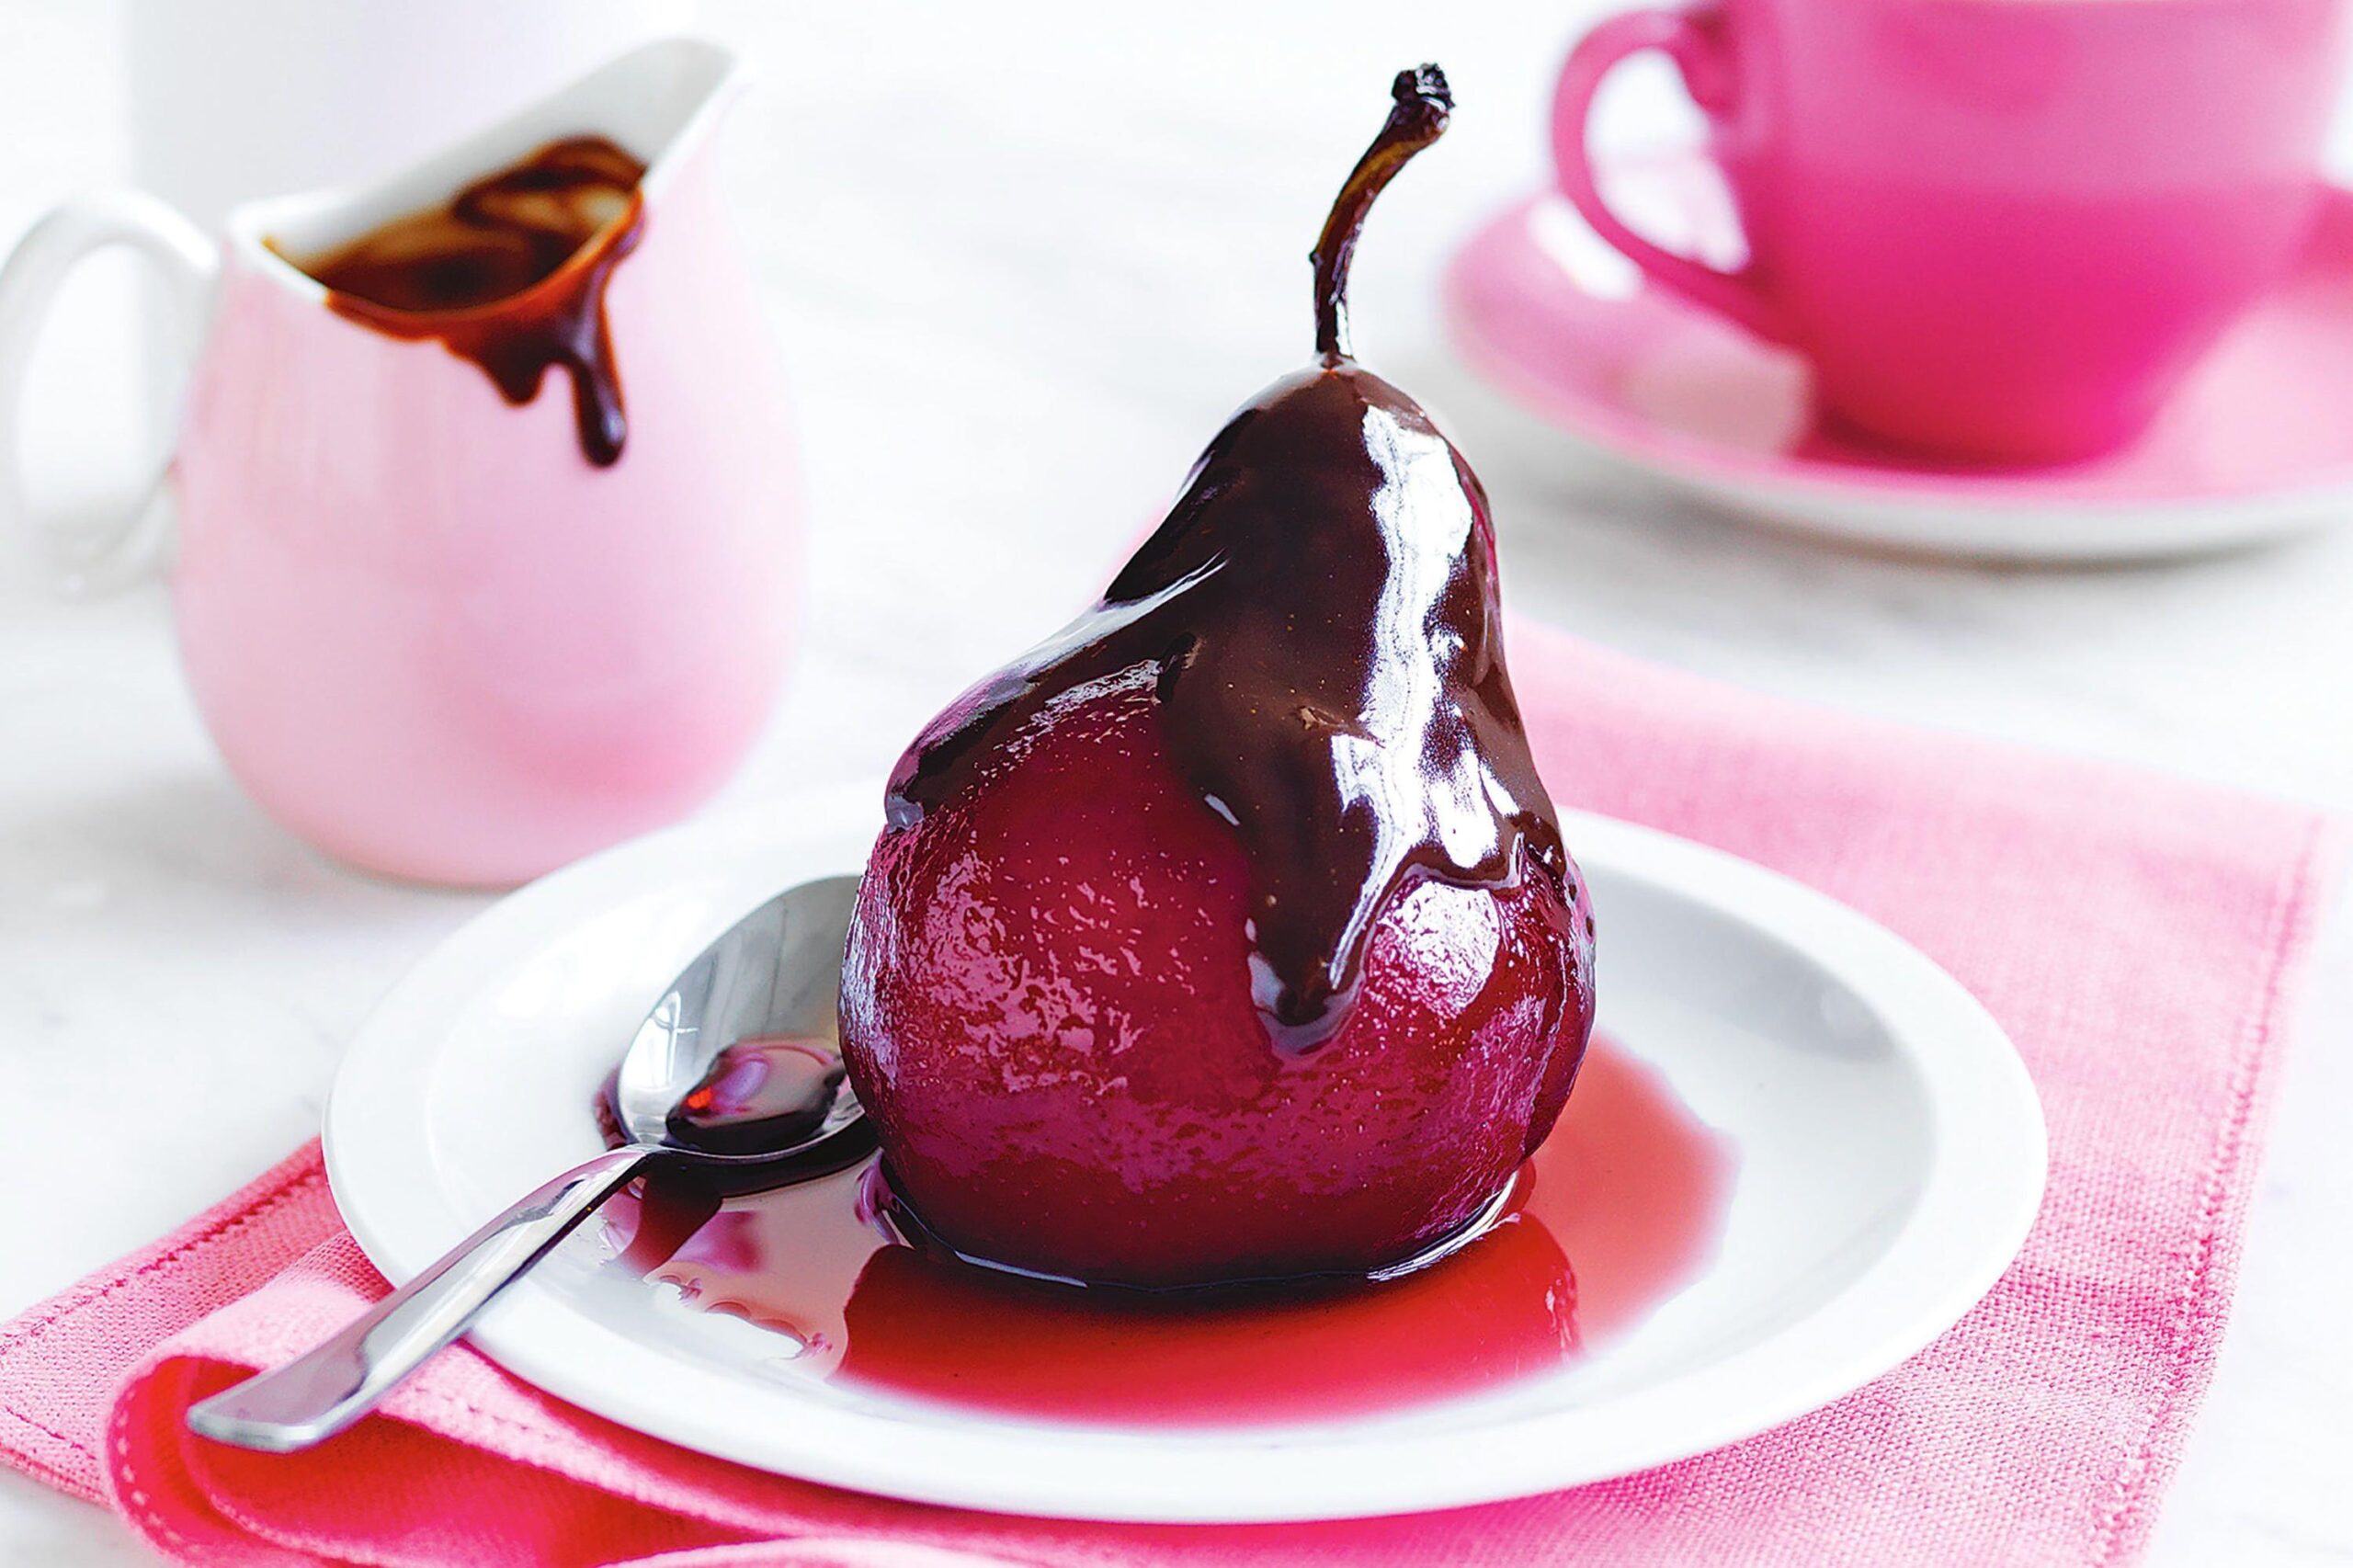  A heavenly combination of coffee, pears, and chocolate!